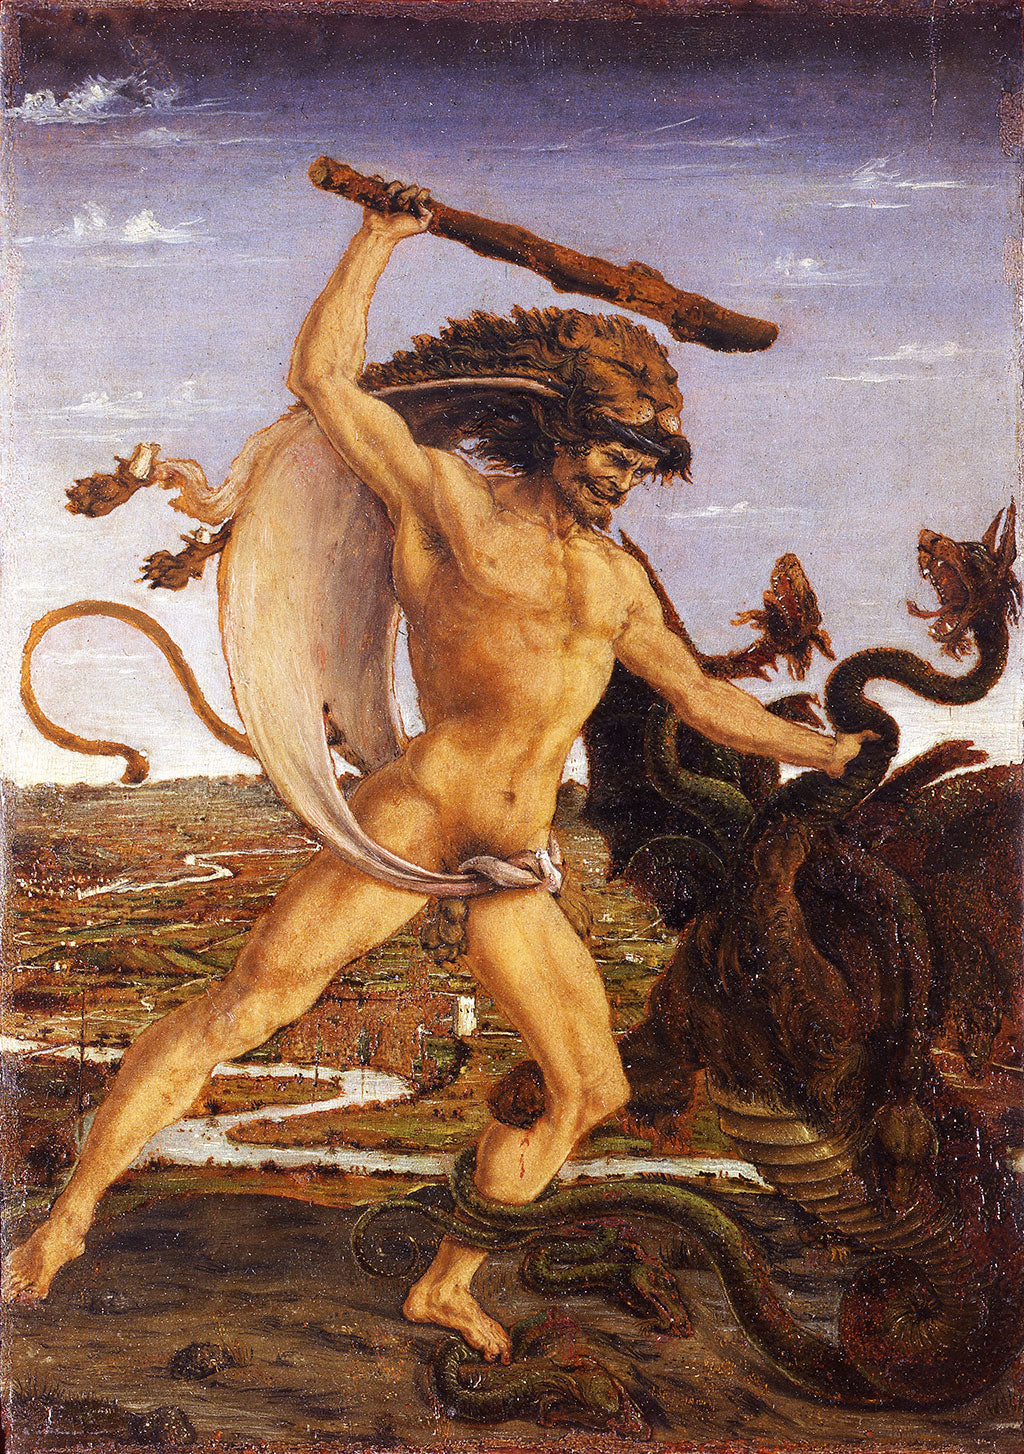 Pollaiolo's masterpiece depicting Hercules and the Hydra of Lerna